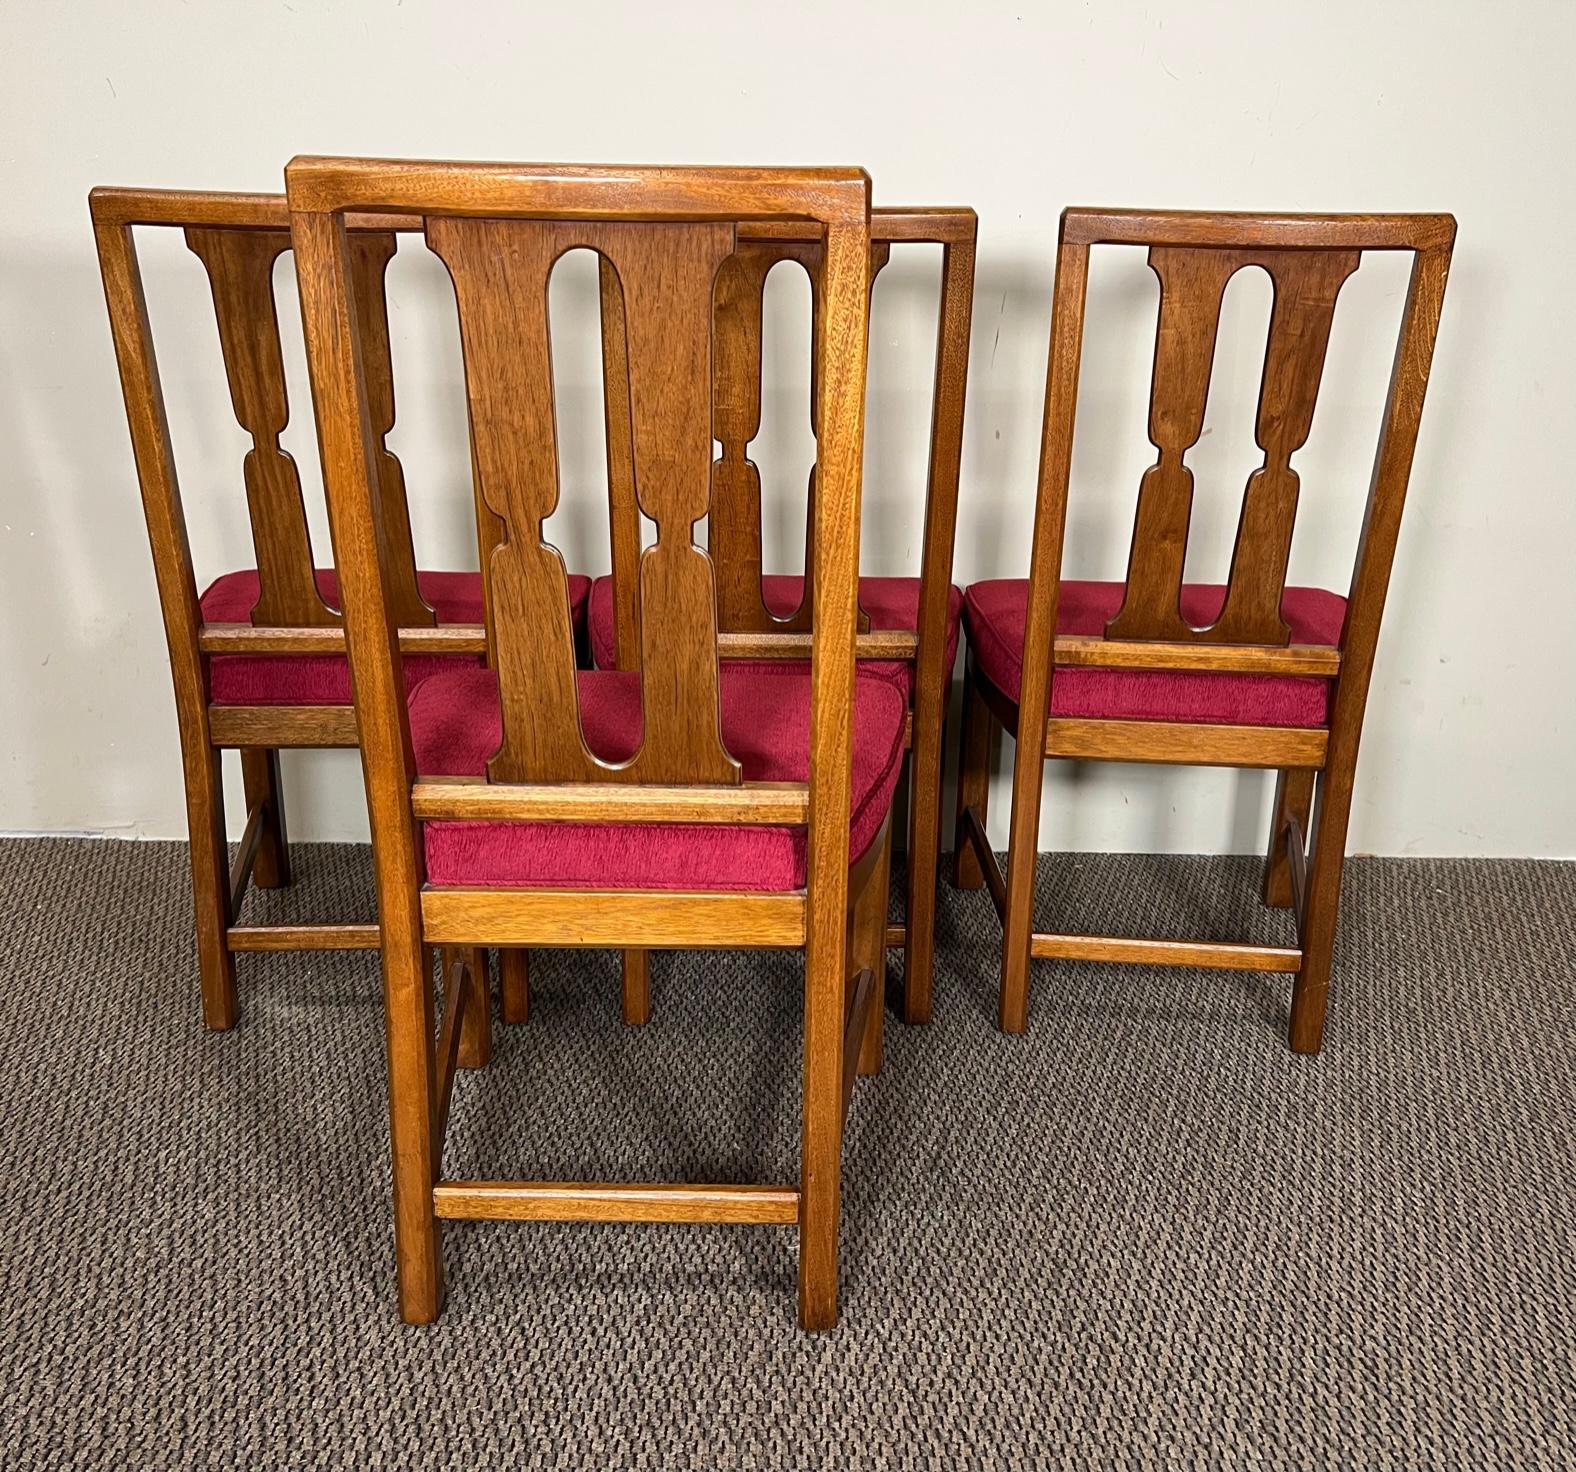 American Set of 6 Mid-Century Modern Walnut Dining Chairs with Red Seats by Henredon For Sale